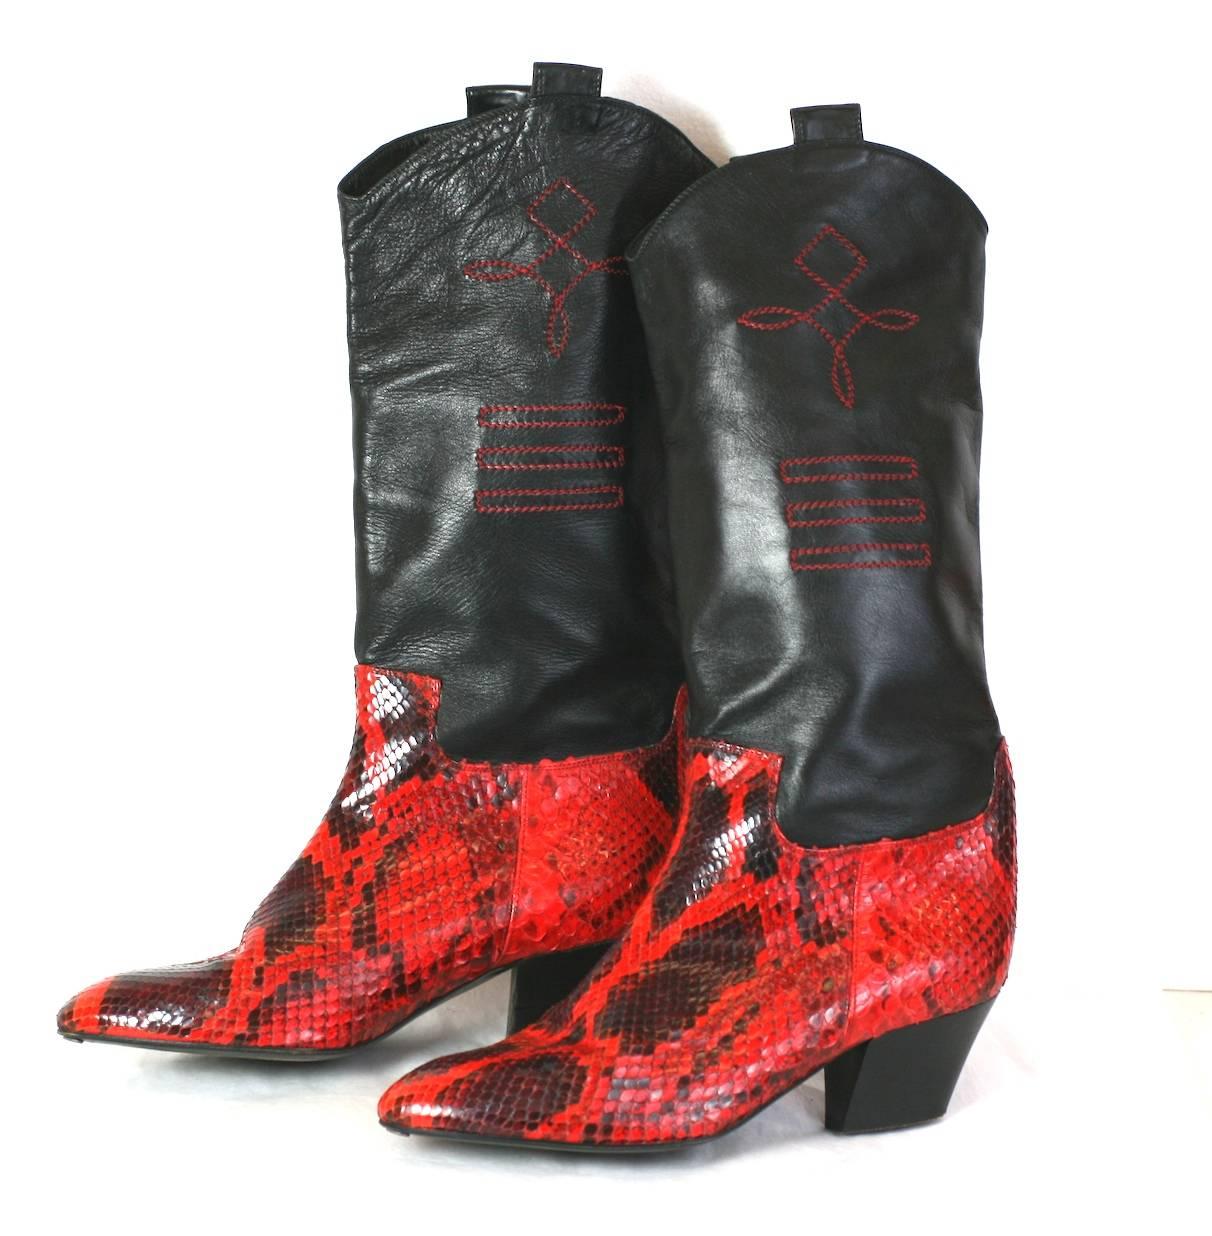 Maud Frizon bright red and black python with black calf  uppers top stitched in red. A French designers take on a American Classic, the Cowboy Boot.
1980's France. Label 